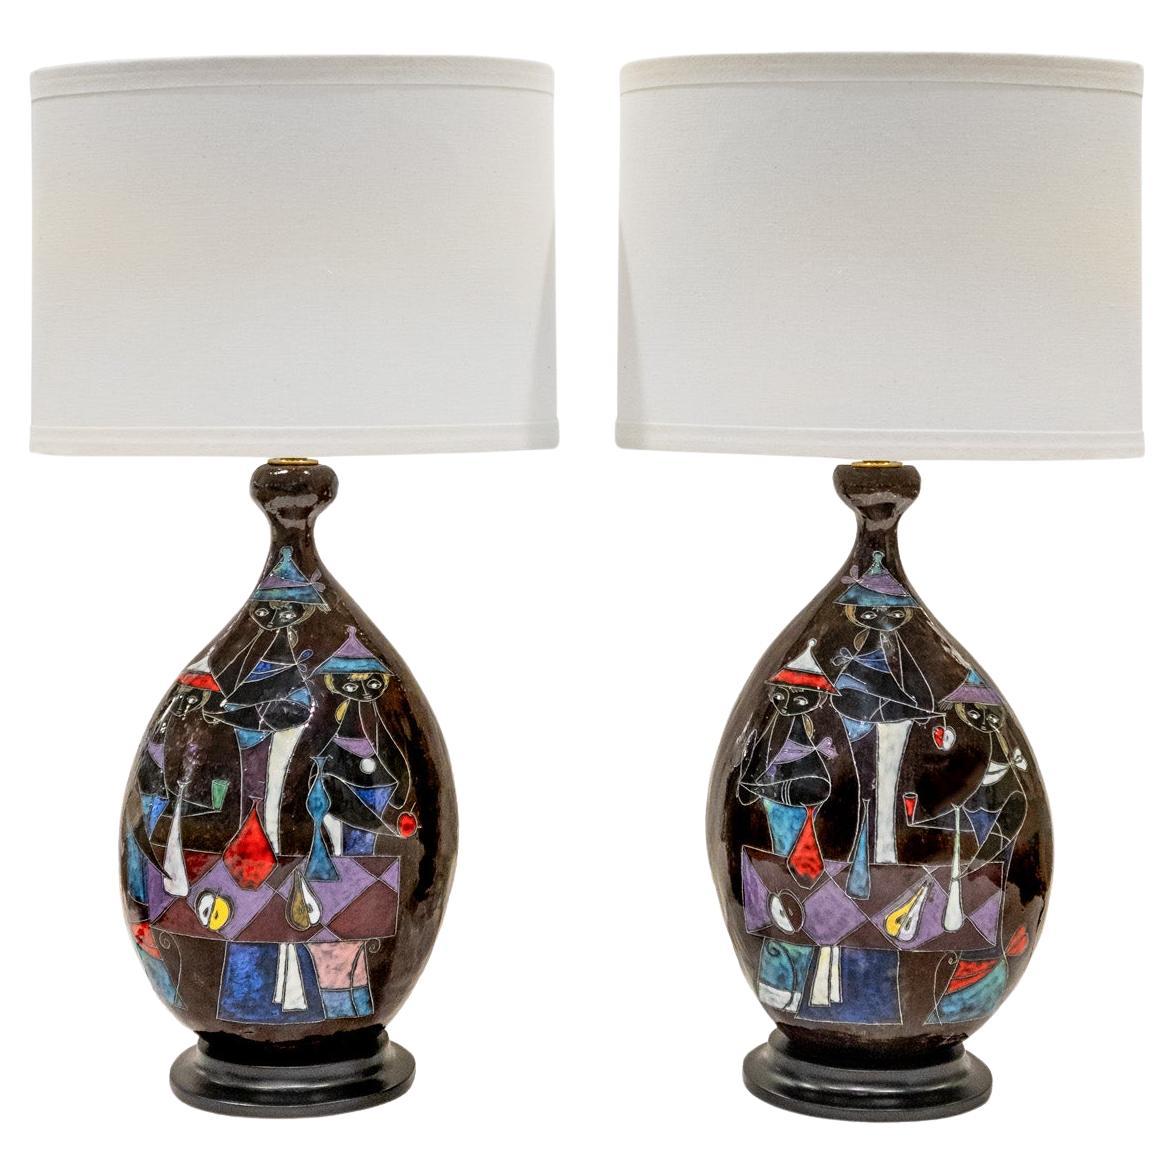 Marcello Fantoni Pair of Ceramic Table Lamps with Figural Motif 1950s (Signed) For Sale